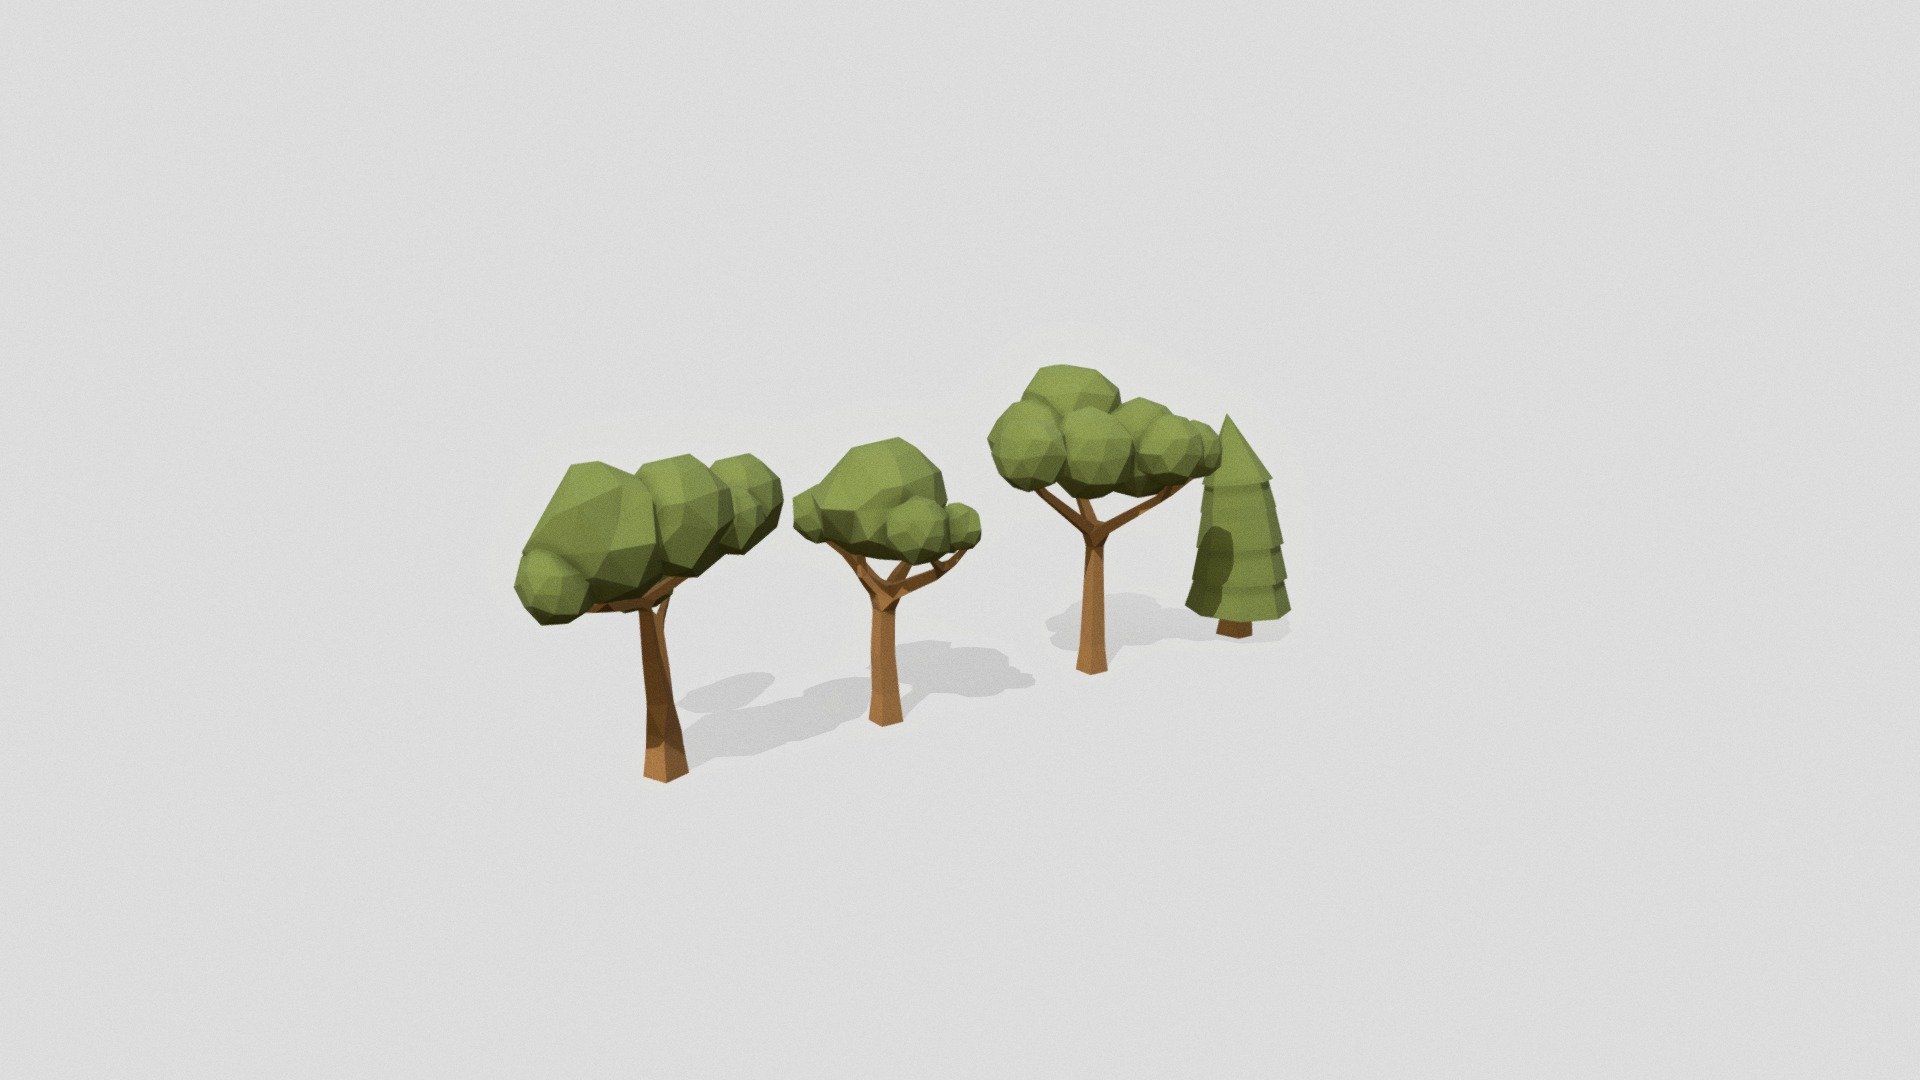 Here some lowpoly trees for your next game or render. Have fun! - Trees - lowpoly - assets - Download Free 3D model by KirbsBtw 3d model